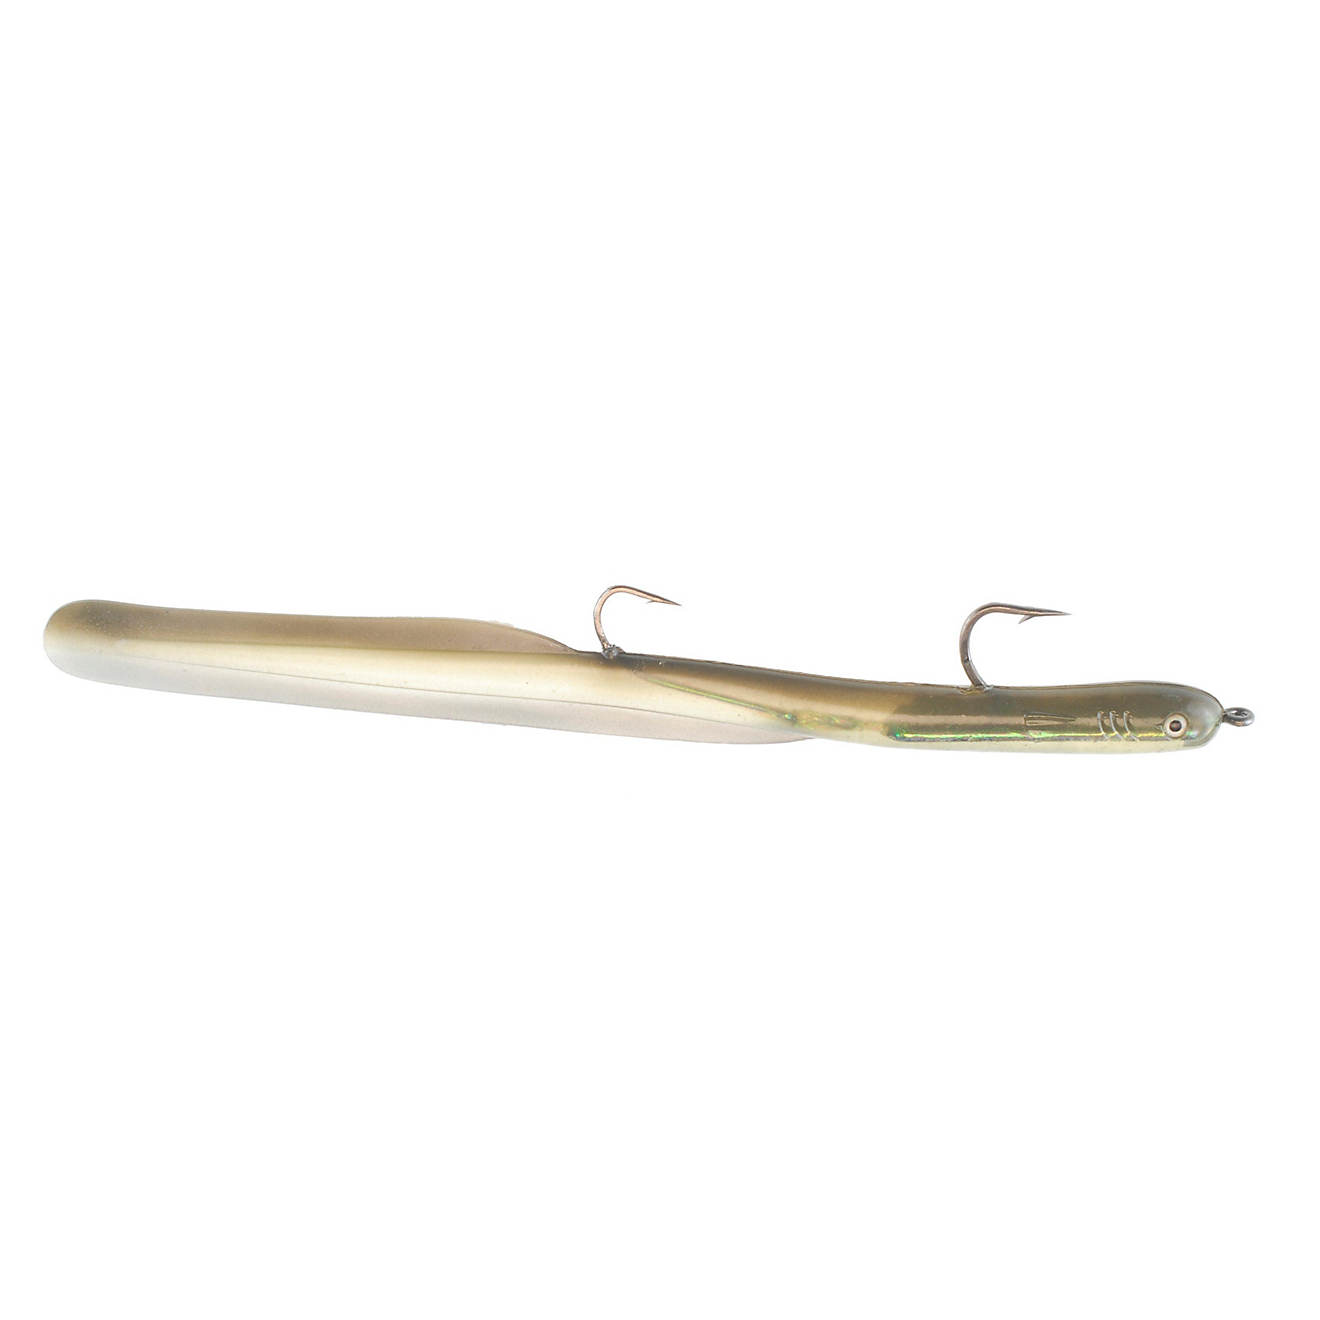 https://academy.scene7.com/is/image/academy//baits---lures/berkley-powerbait--8-in-saltwater-eel-baits-3-pack-swcrtfe8-gn-green/0caade15a5d049558176af2d37b61fed?$pdp-gallery-ng$